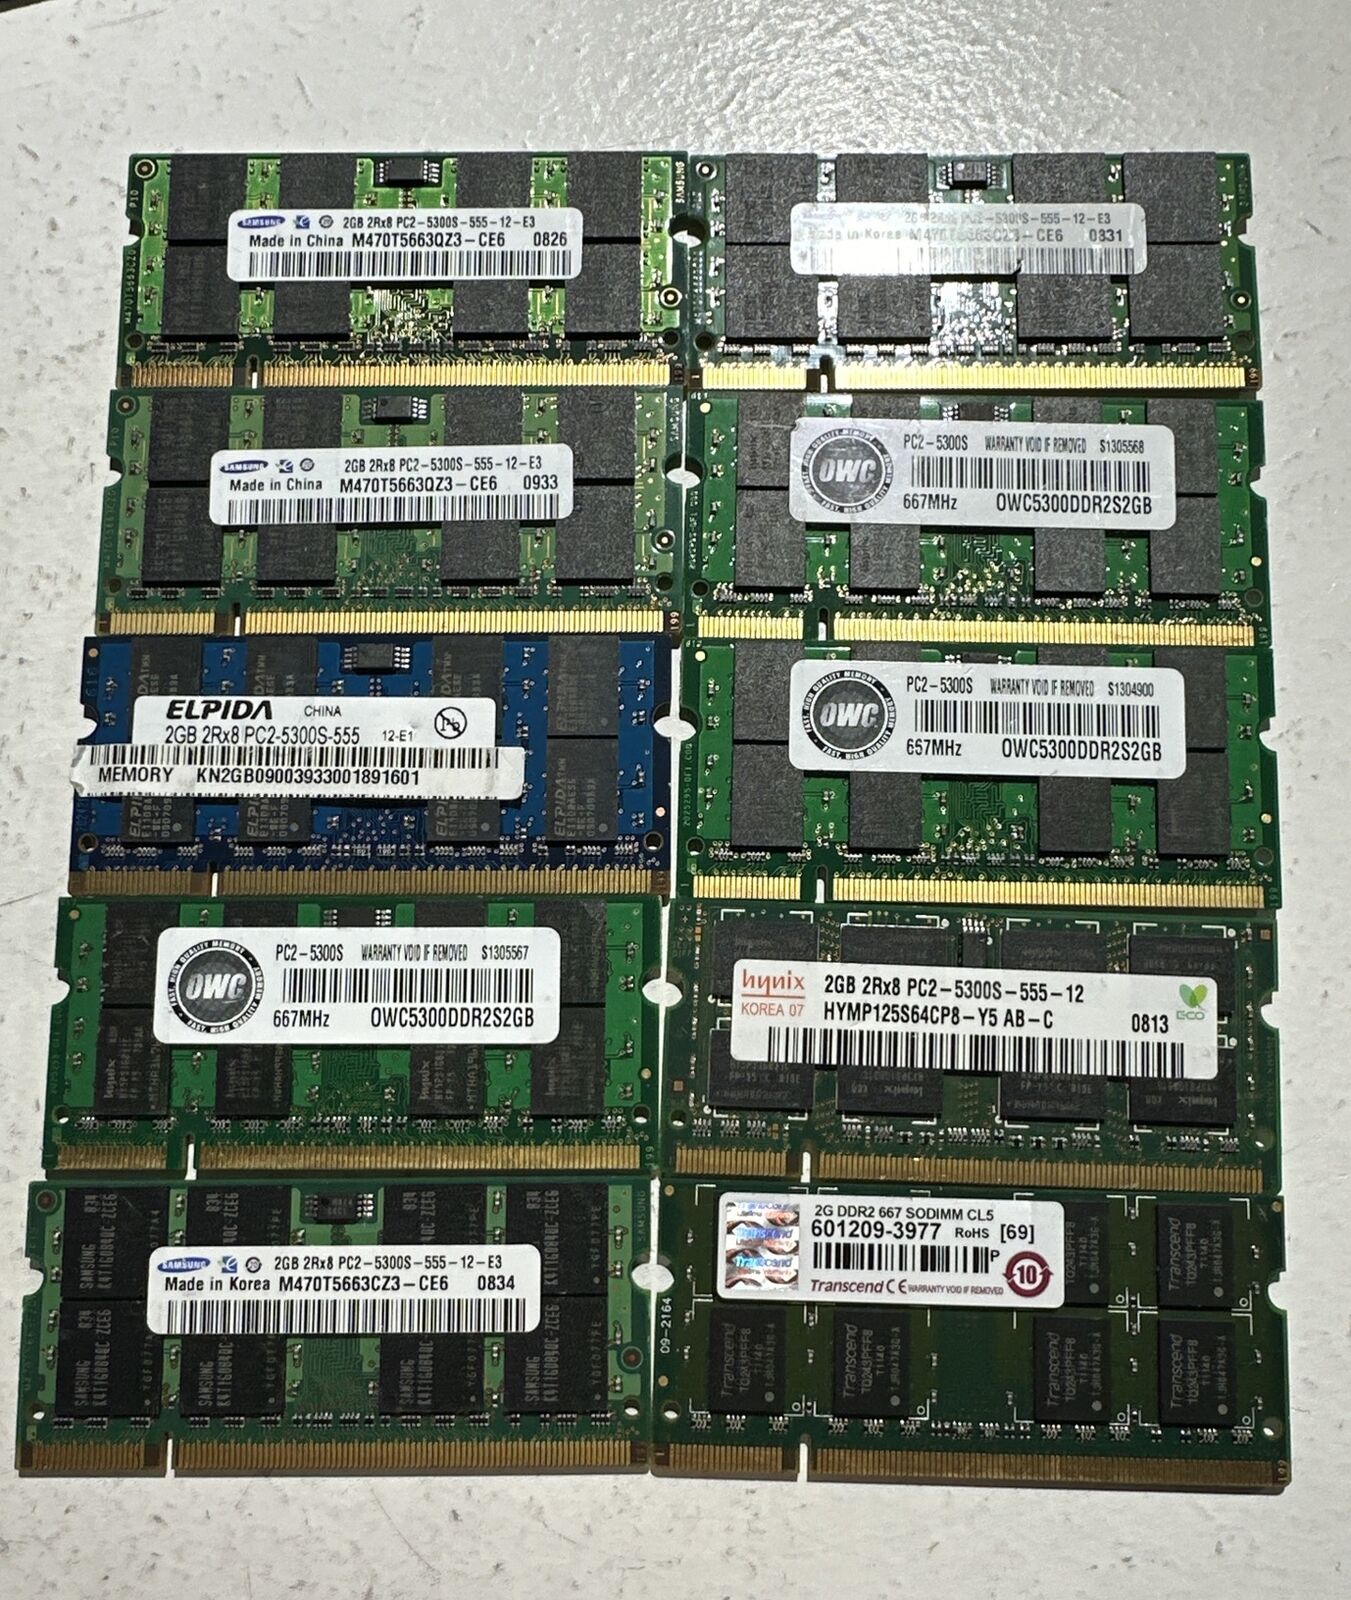 Lot of 10 (20GB) Mixed Brands 2GB PC2-5300 DDR2-667 Laptop Ram Memory